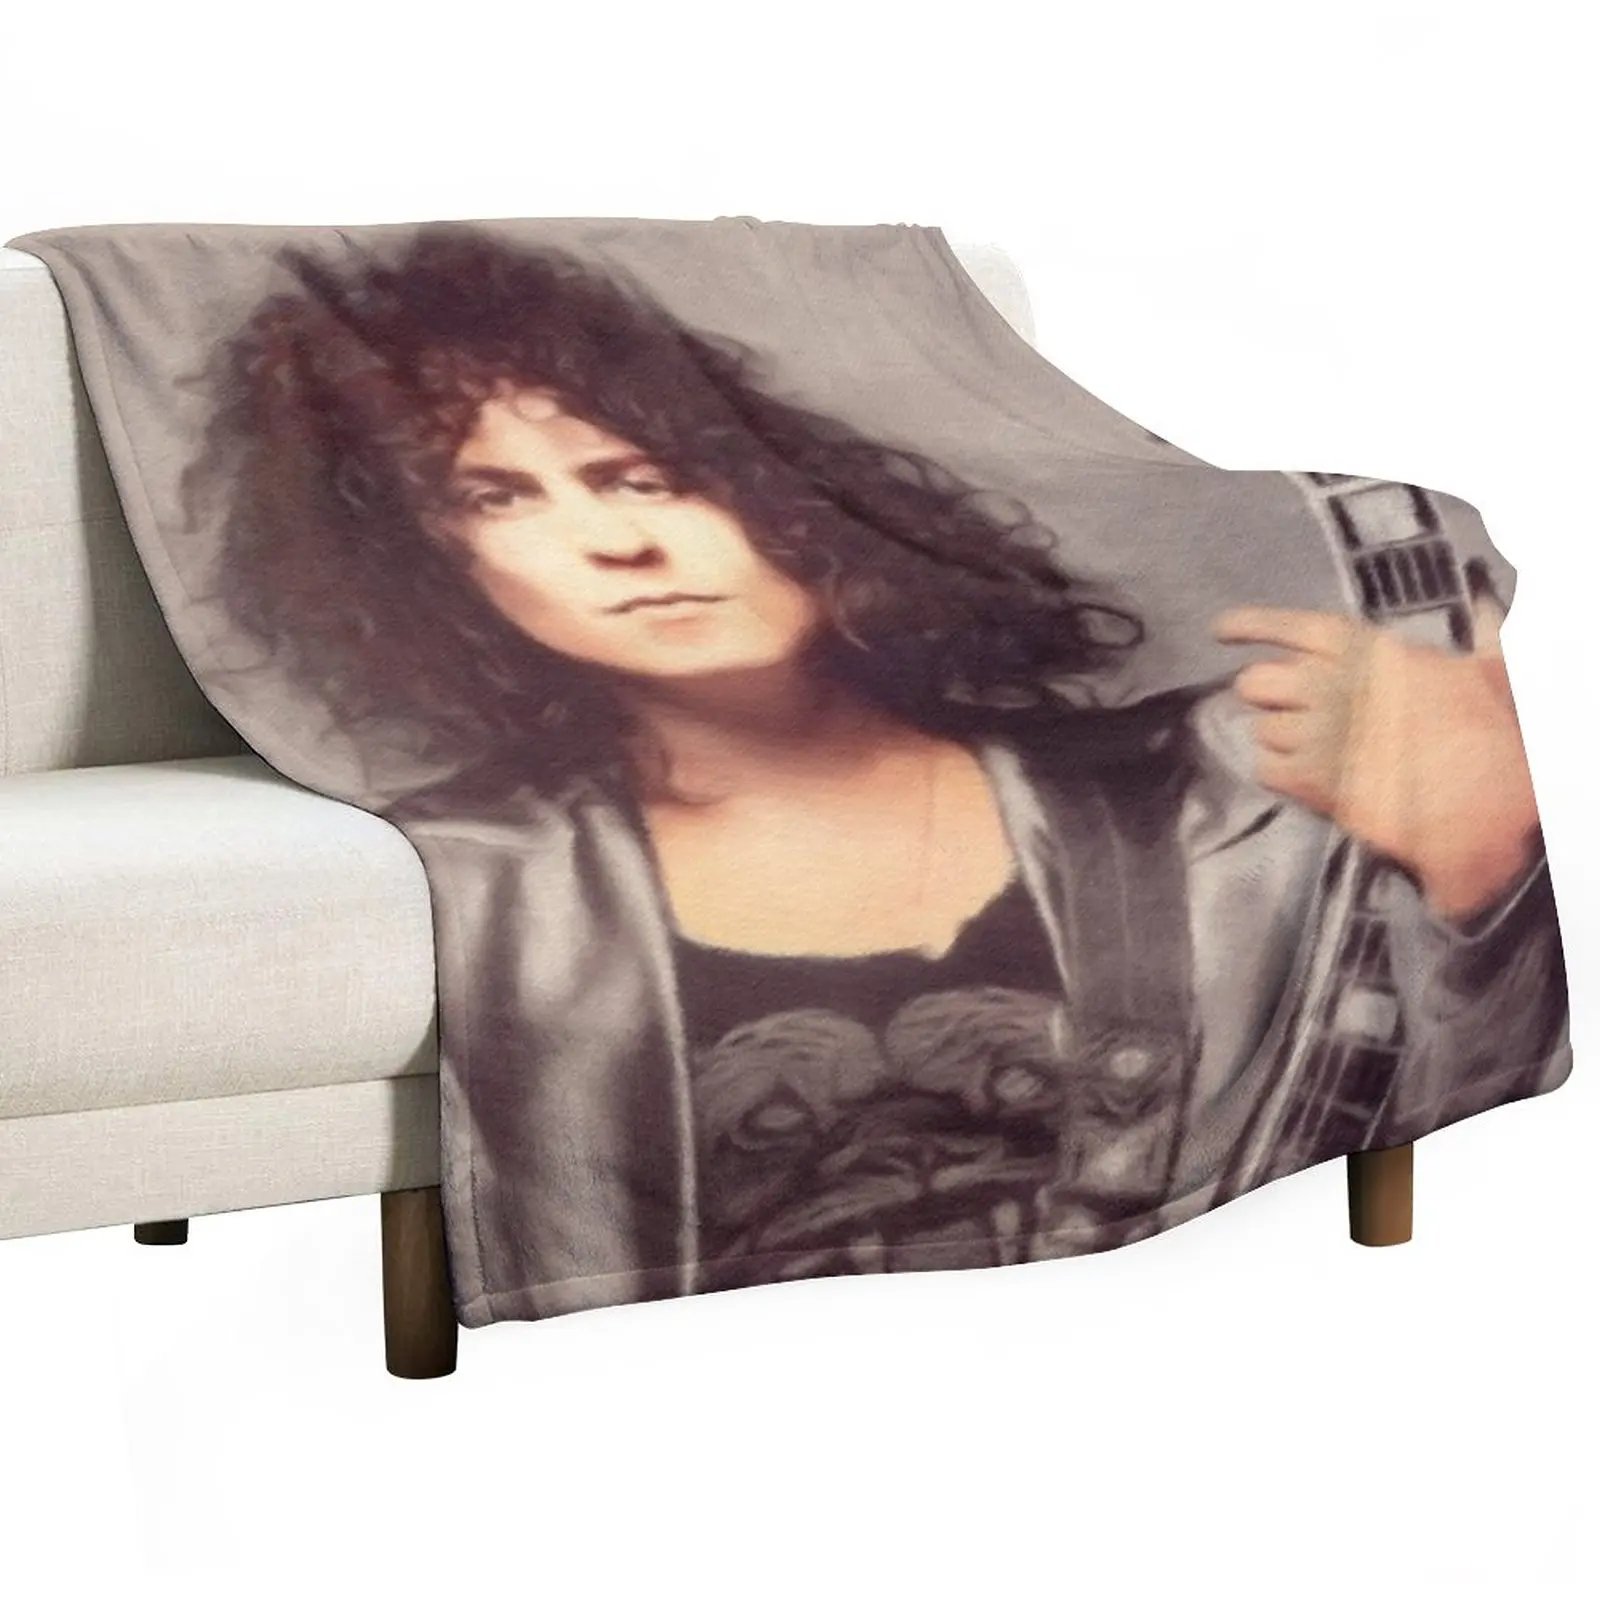 

Marc Bolan, Music Legend Throw Blanket Sofa Quilt Giant Sofa Winter beds Furry Blankets